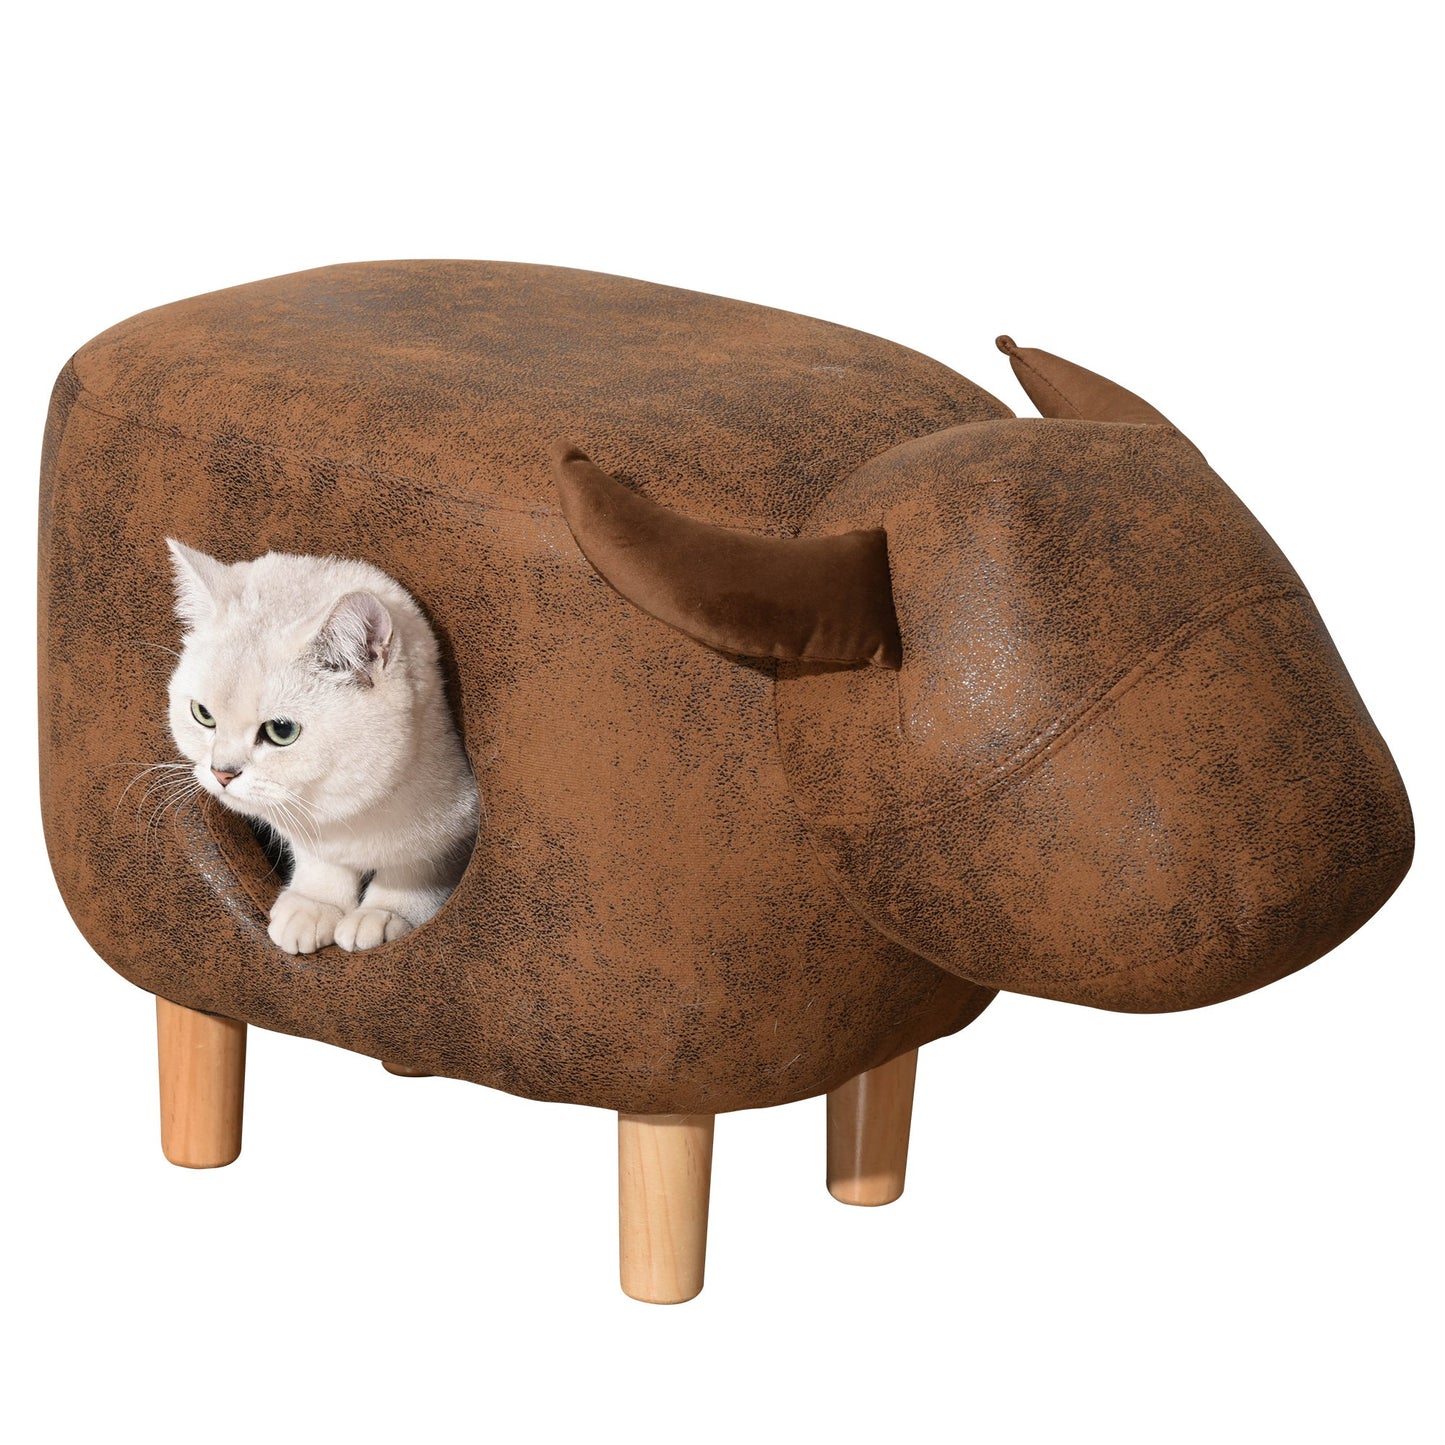 PawHut Pet House Ottoman Cat Bed Footstools Indoor Condo with Cushion, Brown